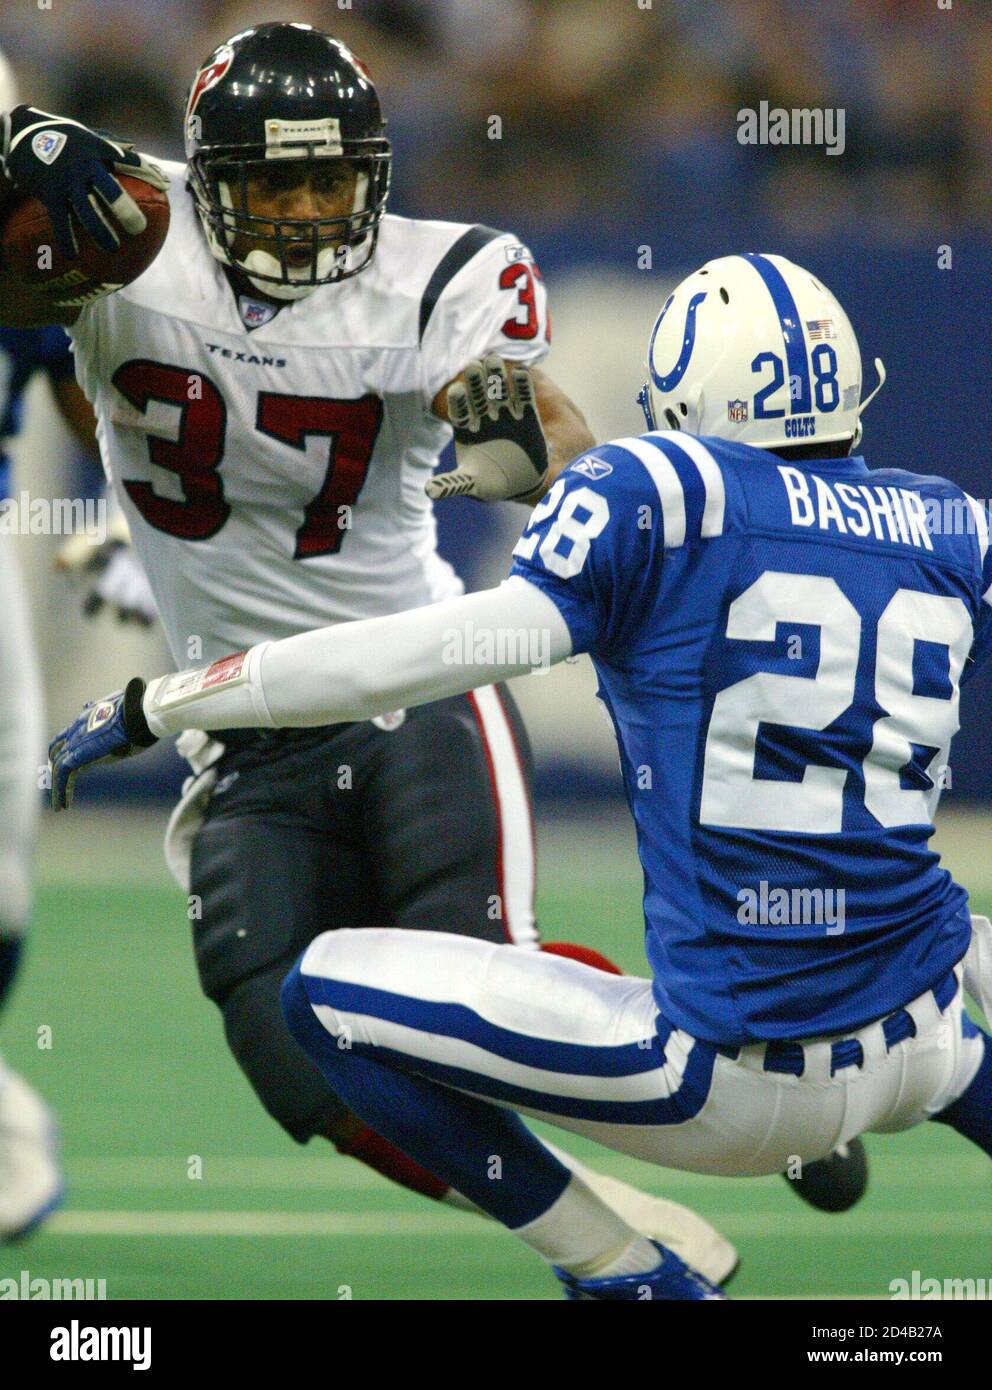 Houston Texans running back Domanick Davis (37) stiff-arms Indianapolis Colts defensive back Idrees Bashir (28) on his way to a second-quarter touchdown, October 26, 2003 at the RCA Dome in Indianapolis. Davis ran for 15 yards on the play. REUTERS/Brent Smith  BS/GAC Stock Photo